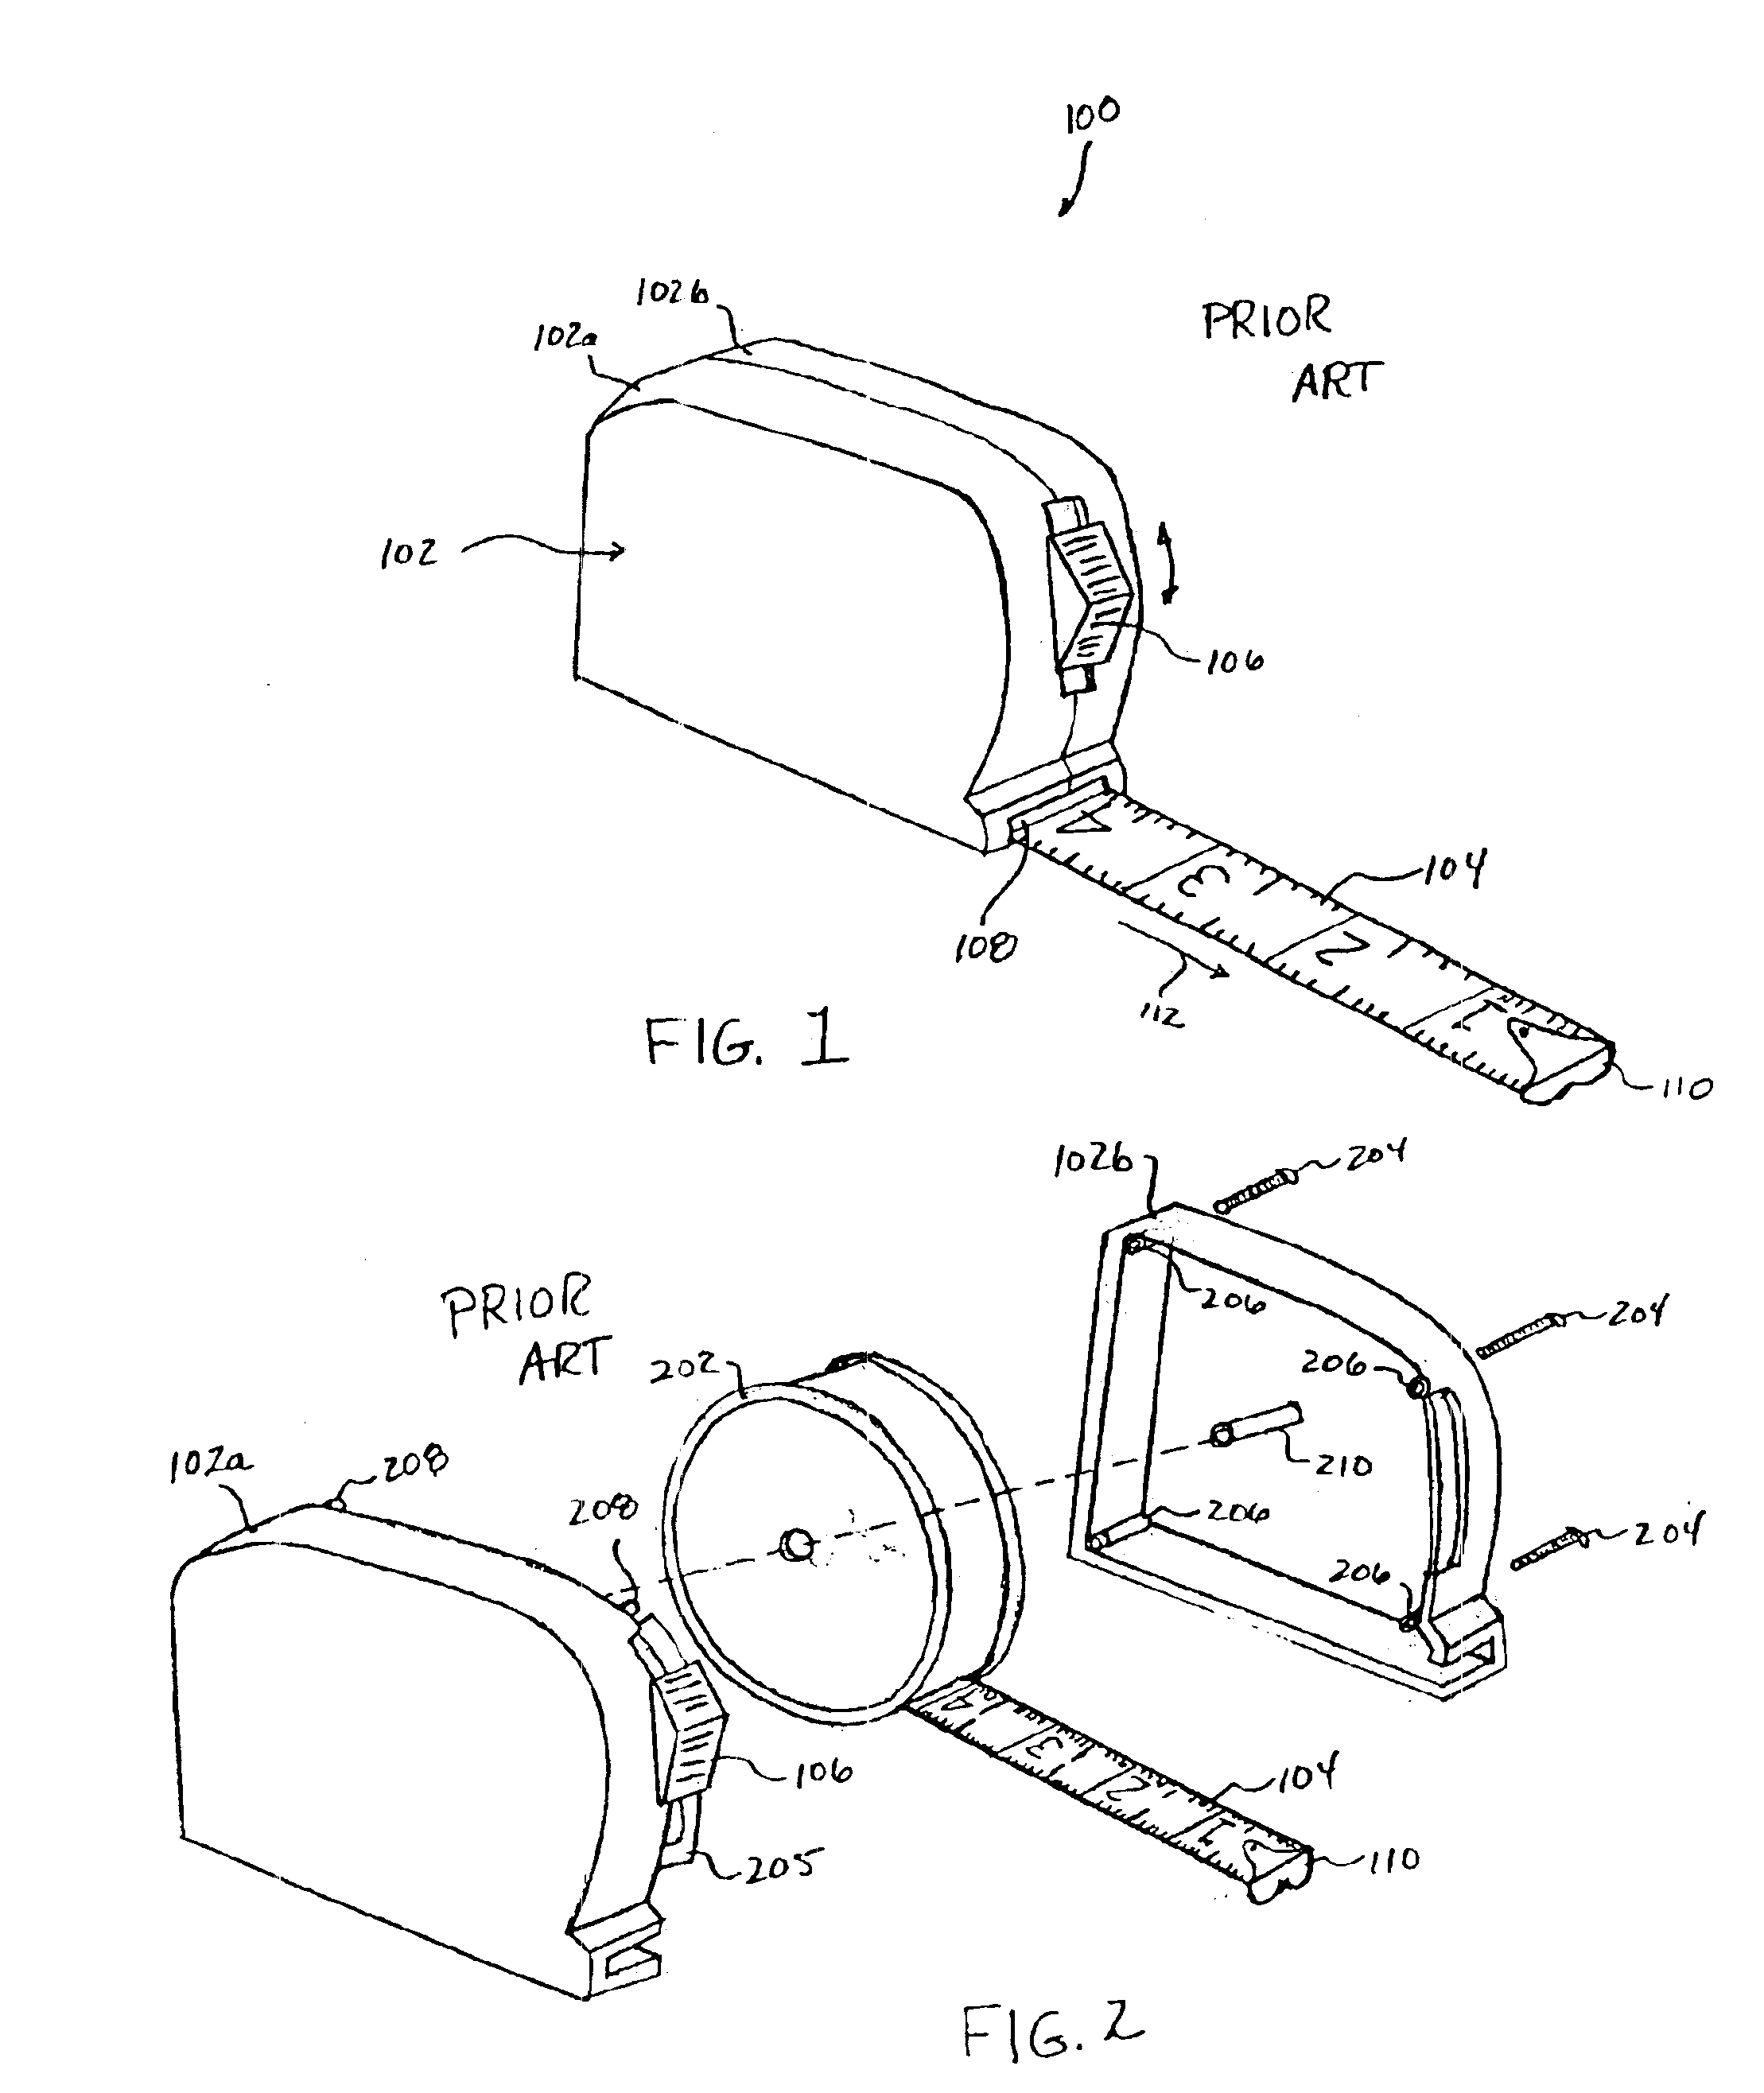 Marking mechanism for a tape measure and tape measure incorporating same